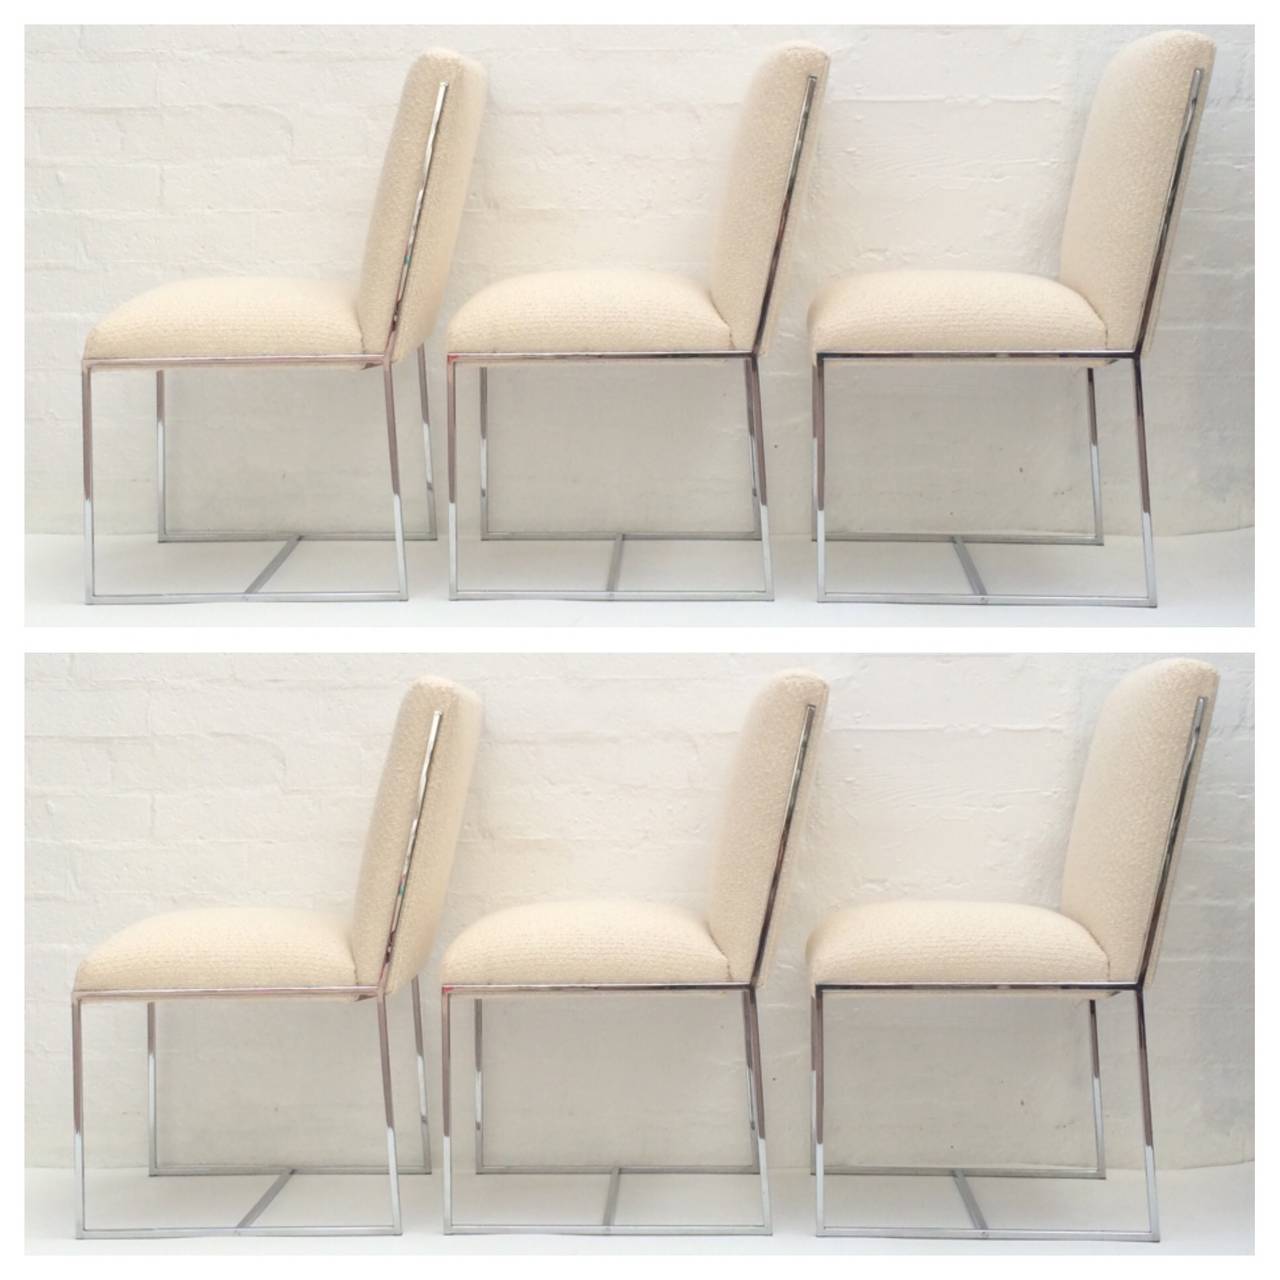 Six polished chrome base dining chairs designed by Milo Baughman circa 1970s. 
Newly reupholstered in a off-white nubby fabric.